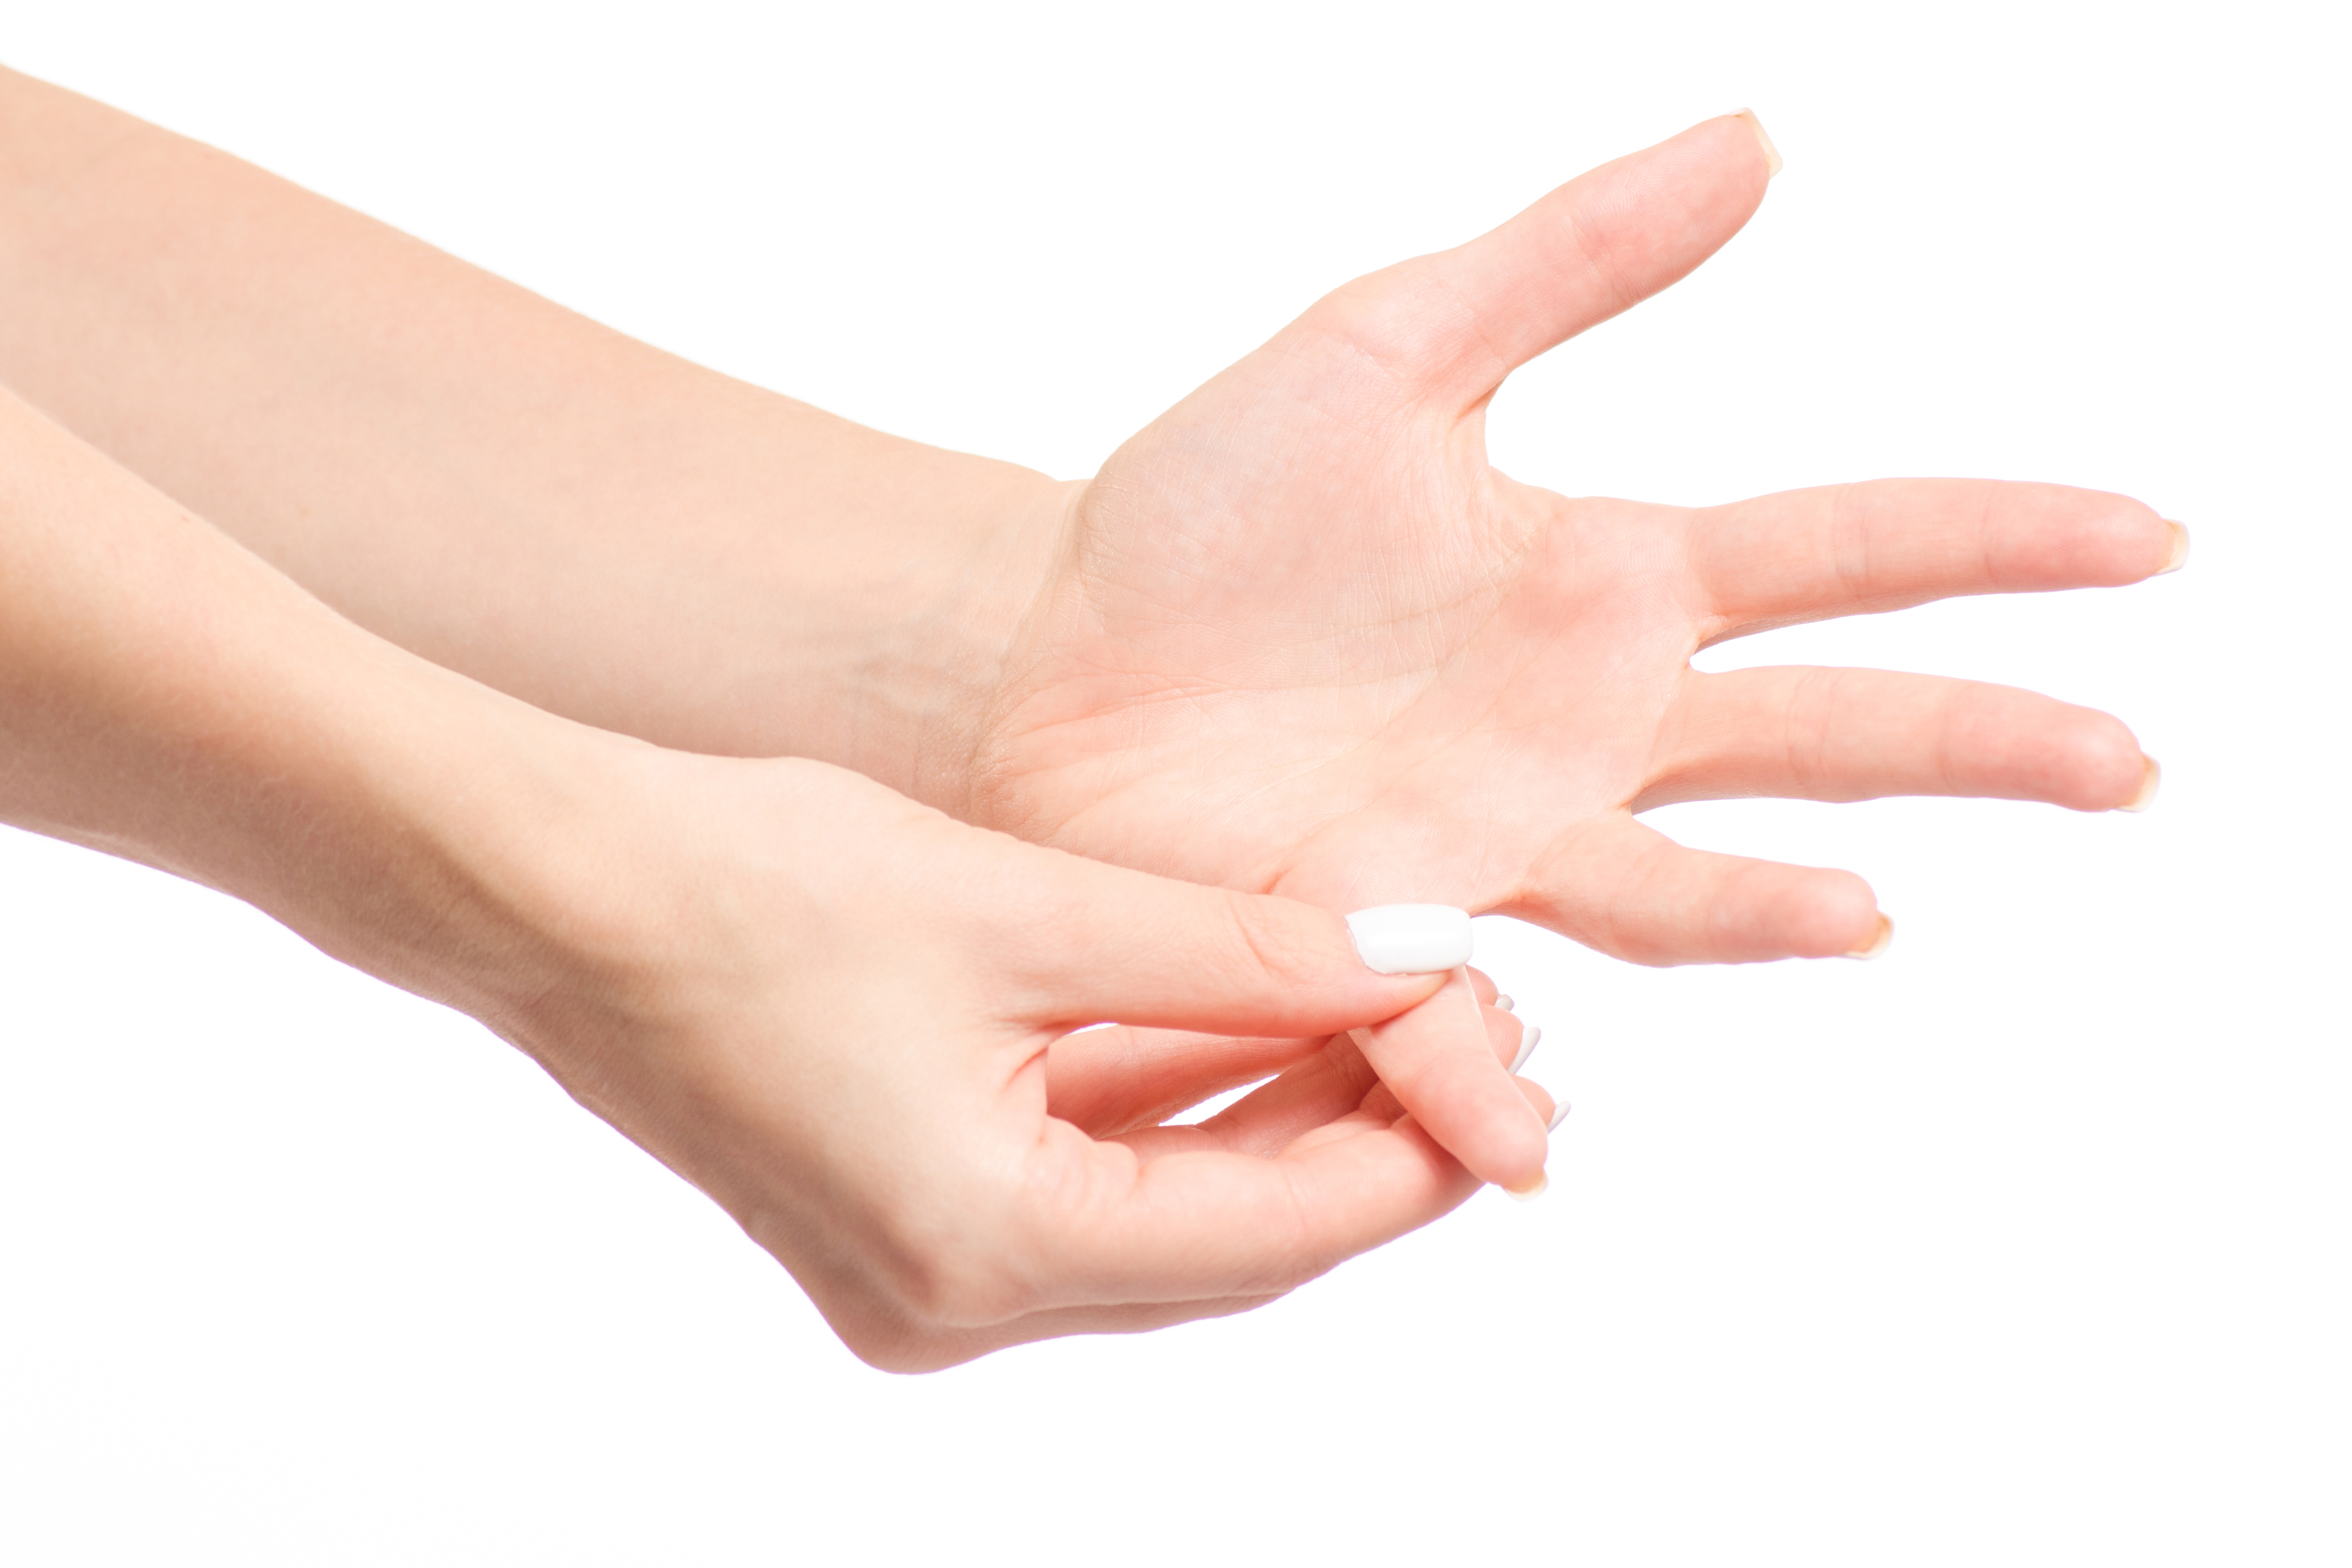 dislocate your thumb without pain